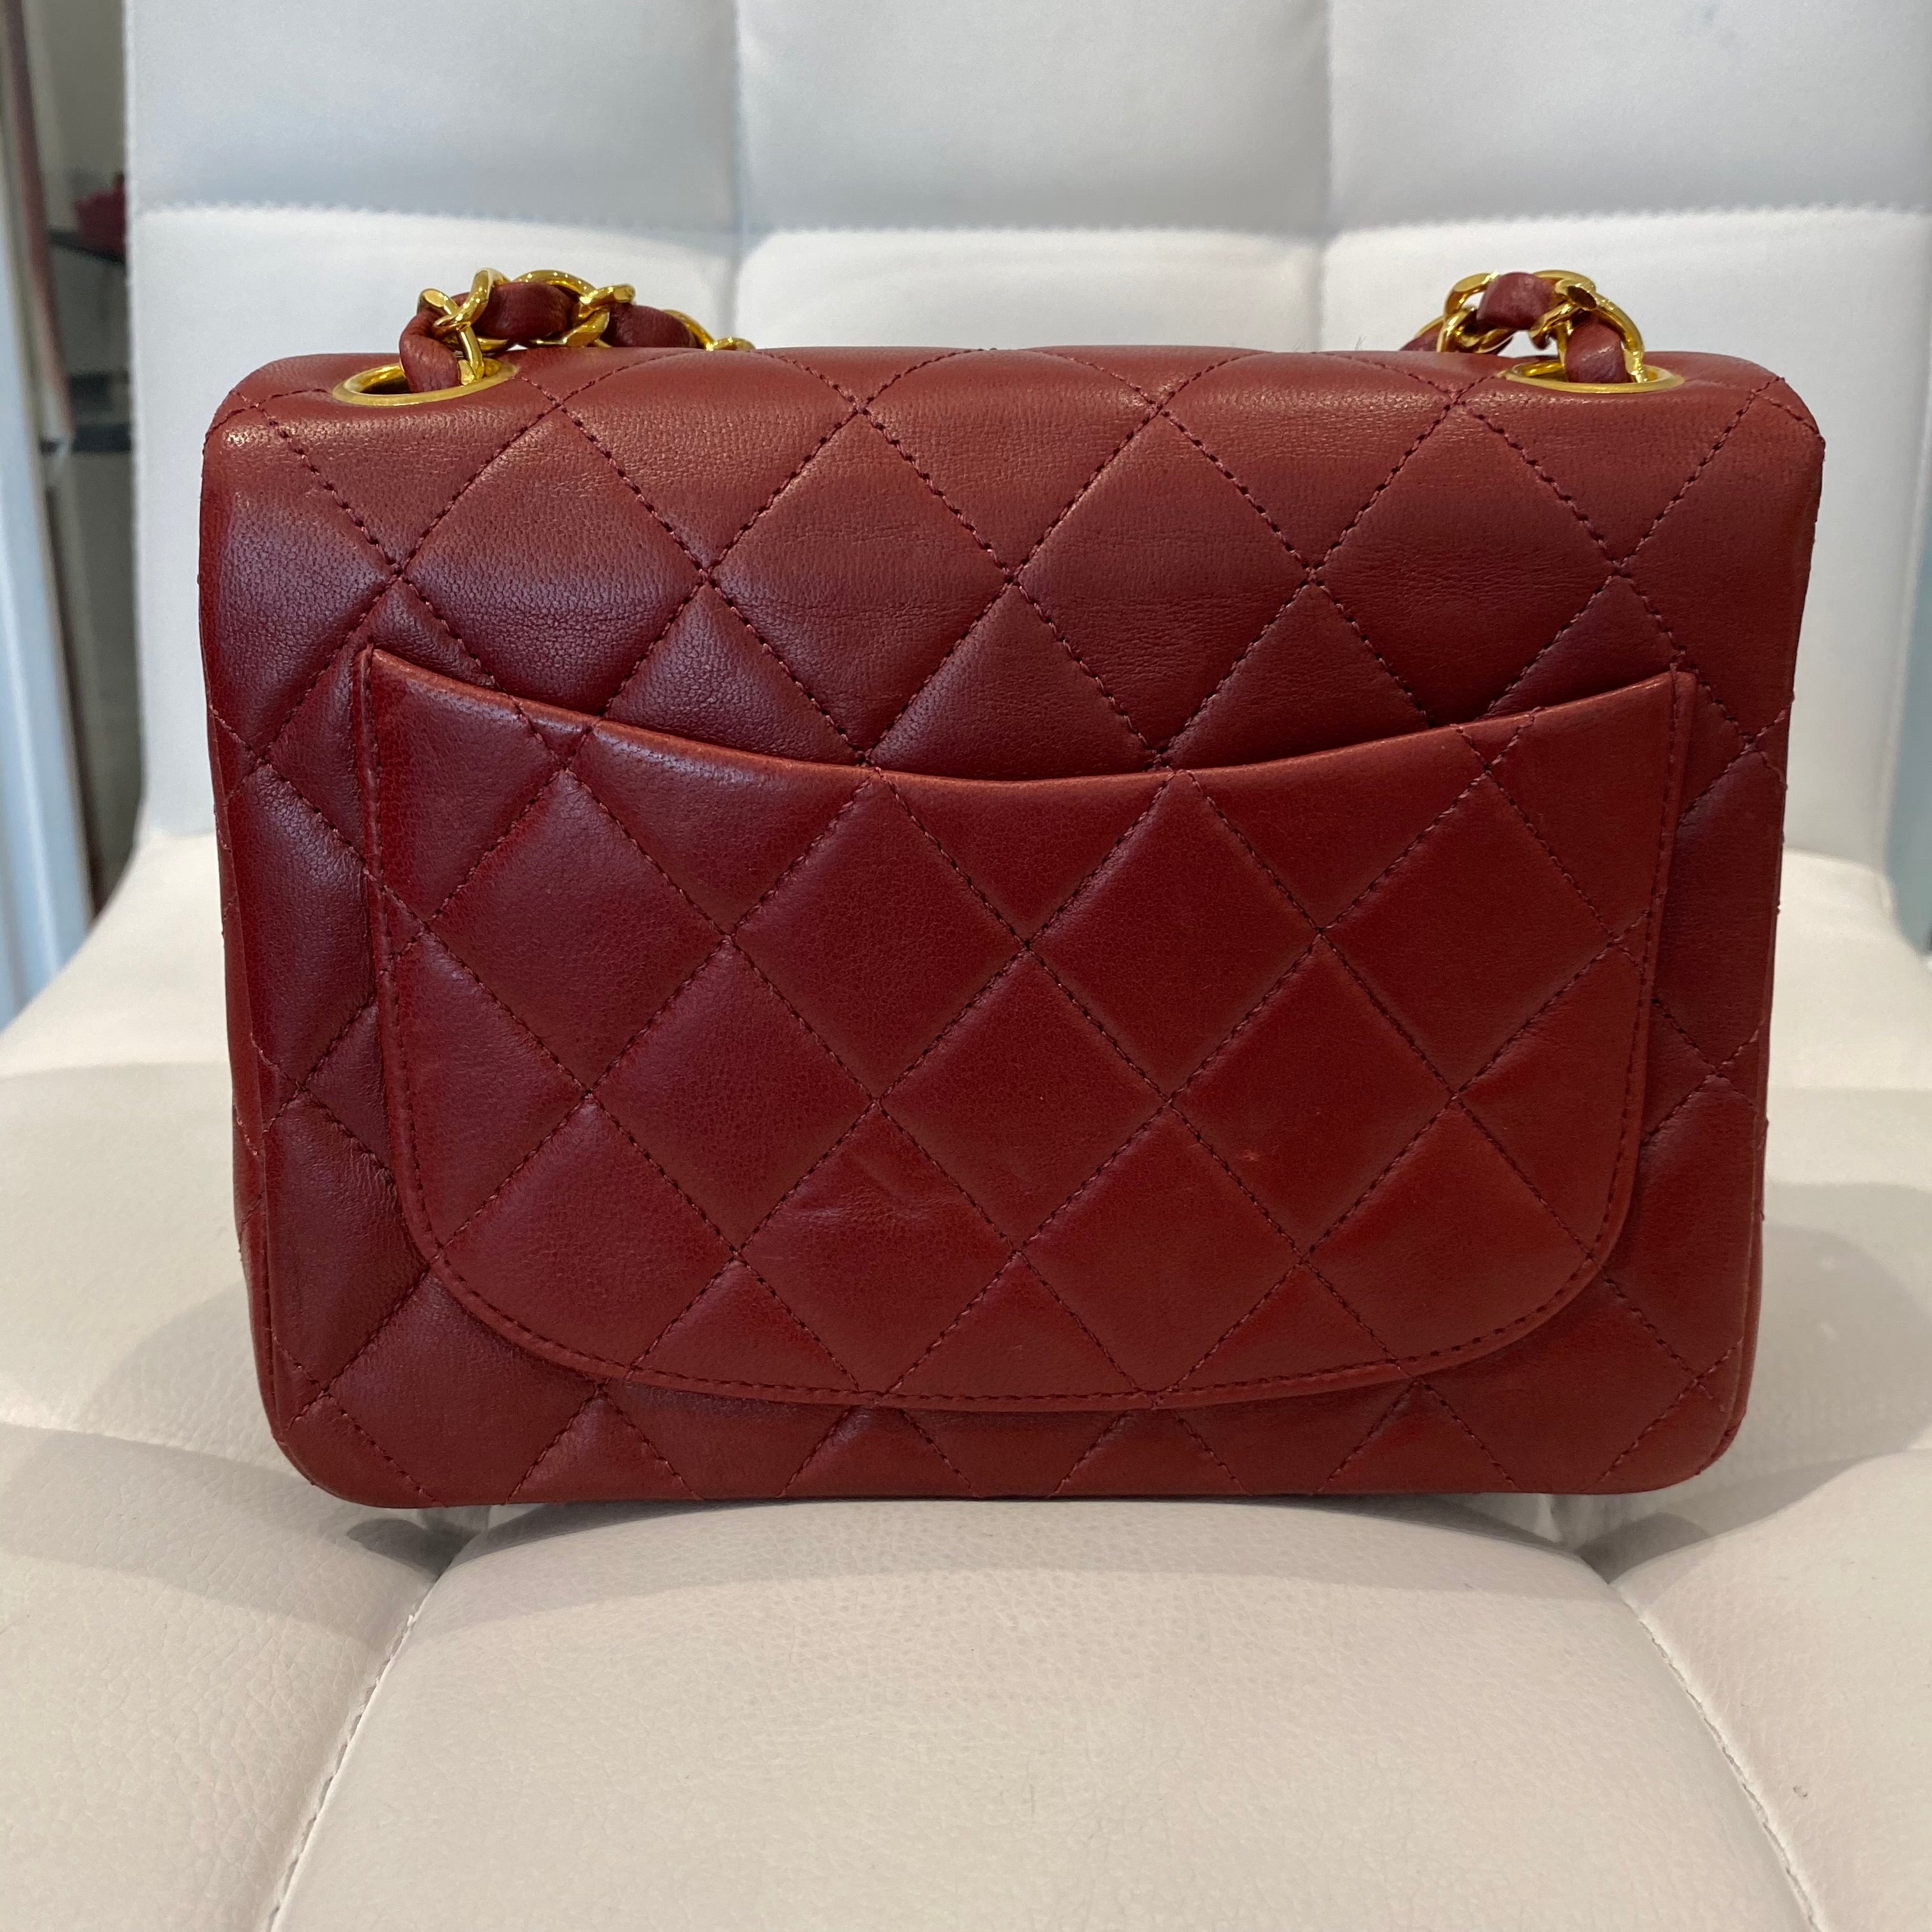 Chanel CF Small Bag Insert in Carmine Red.